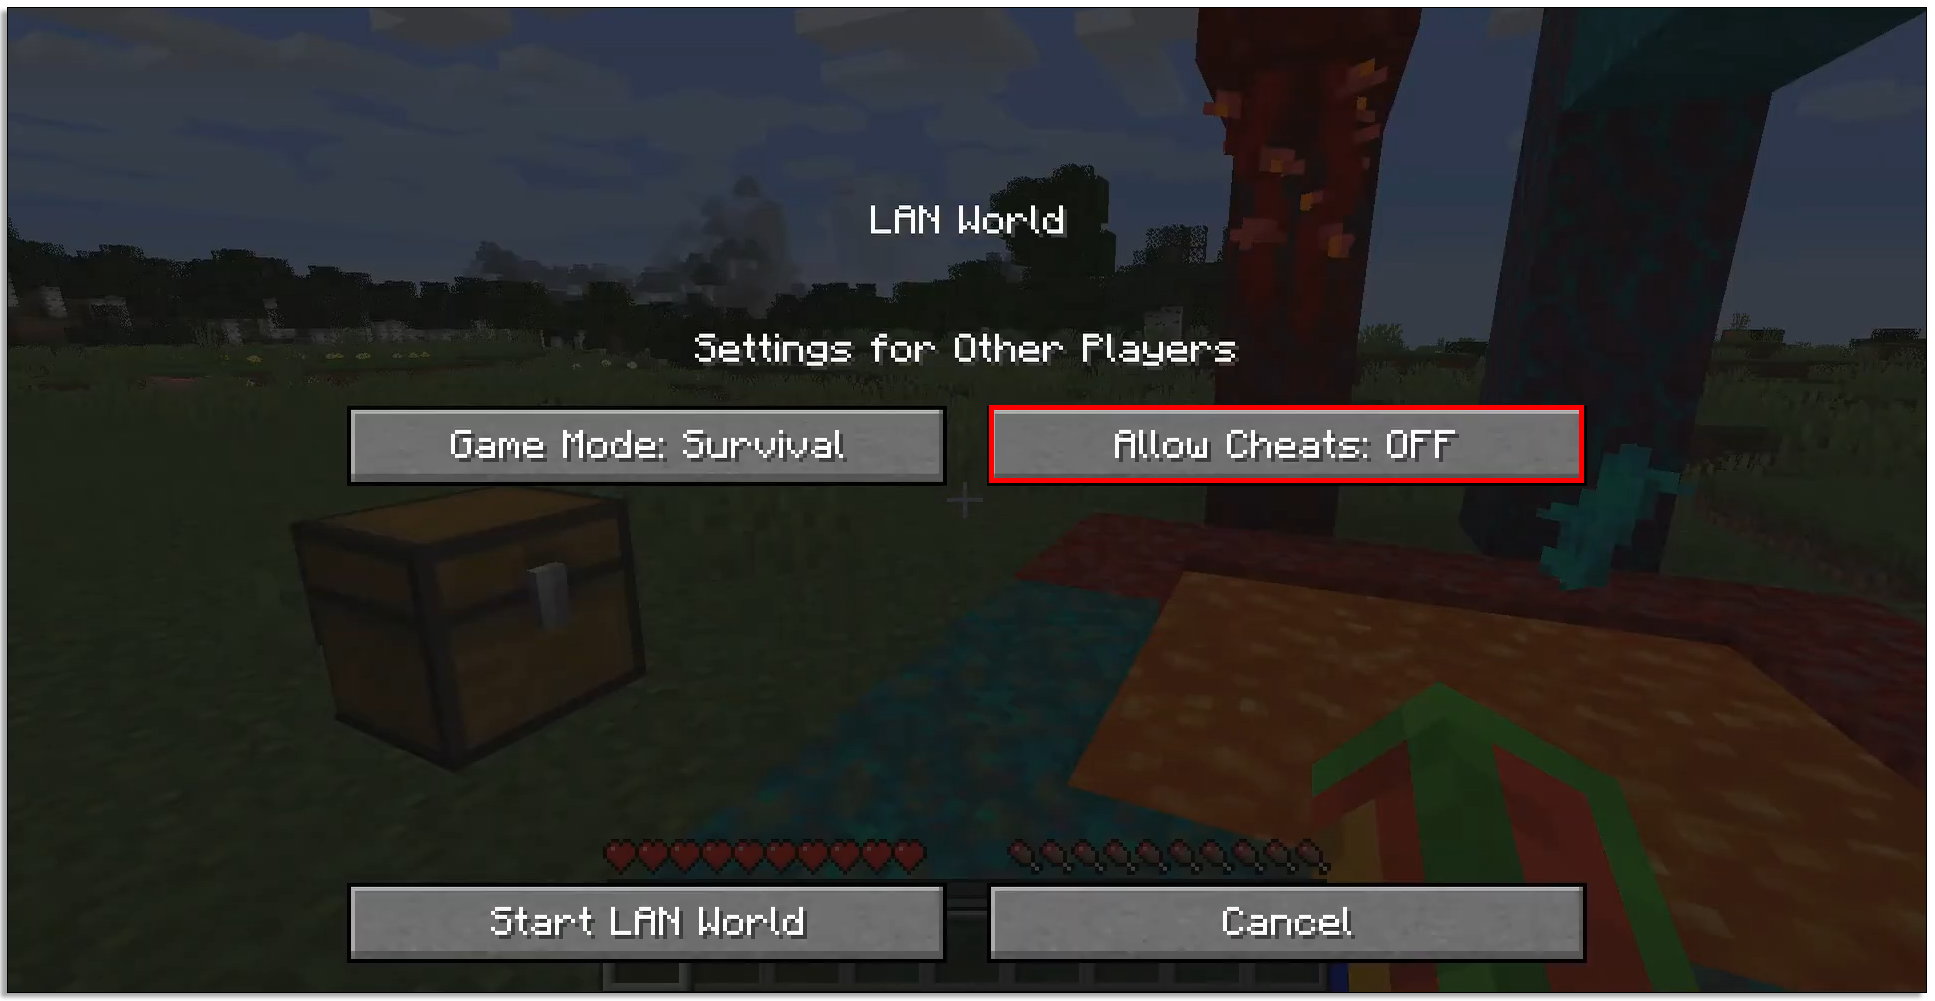 Minecraft how would you choose?